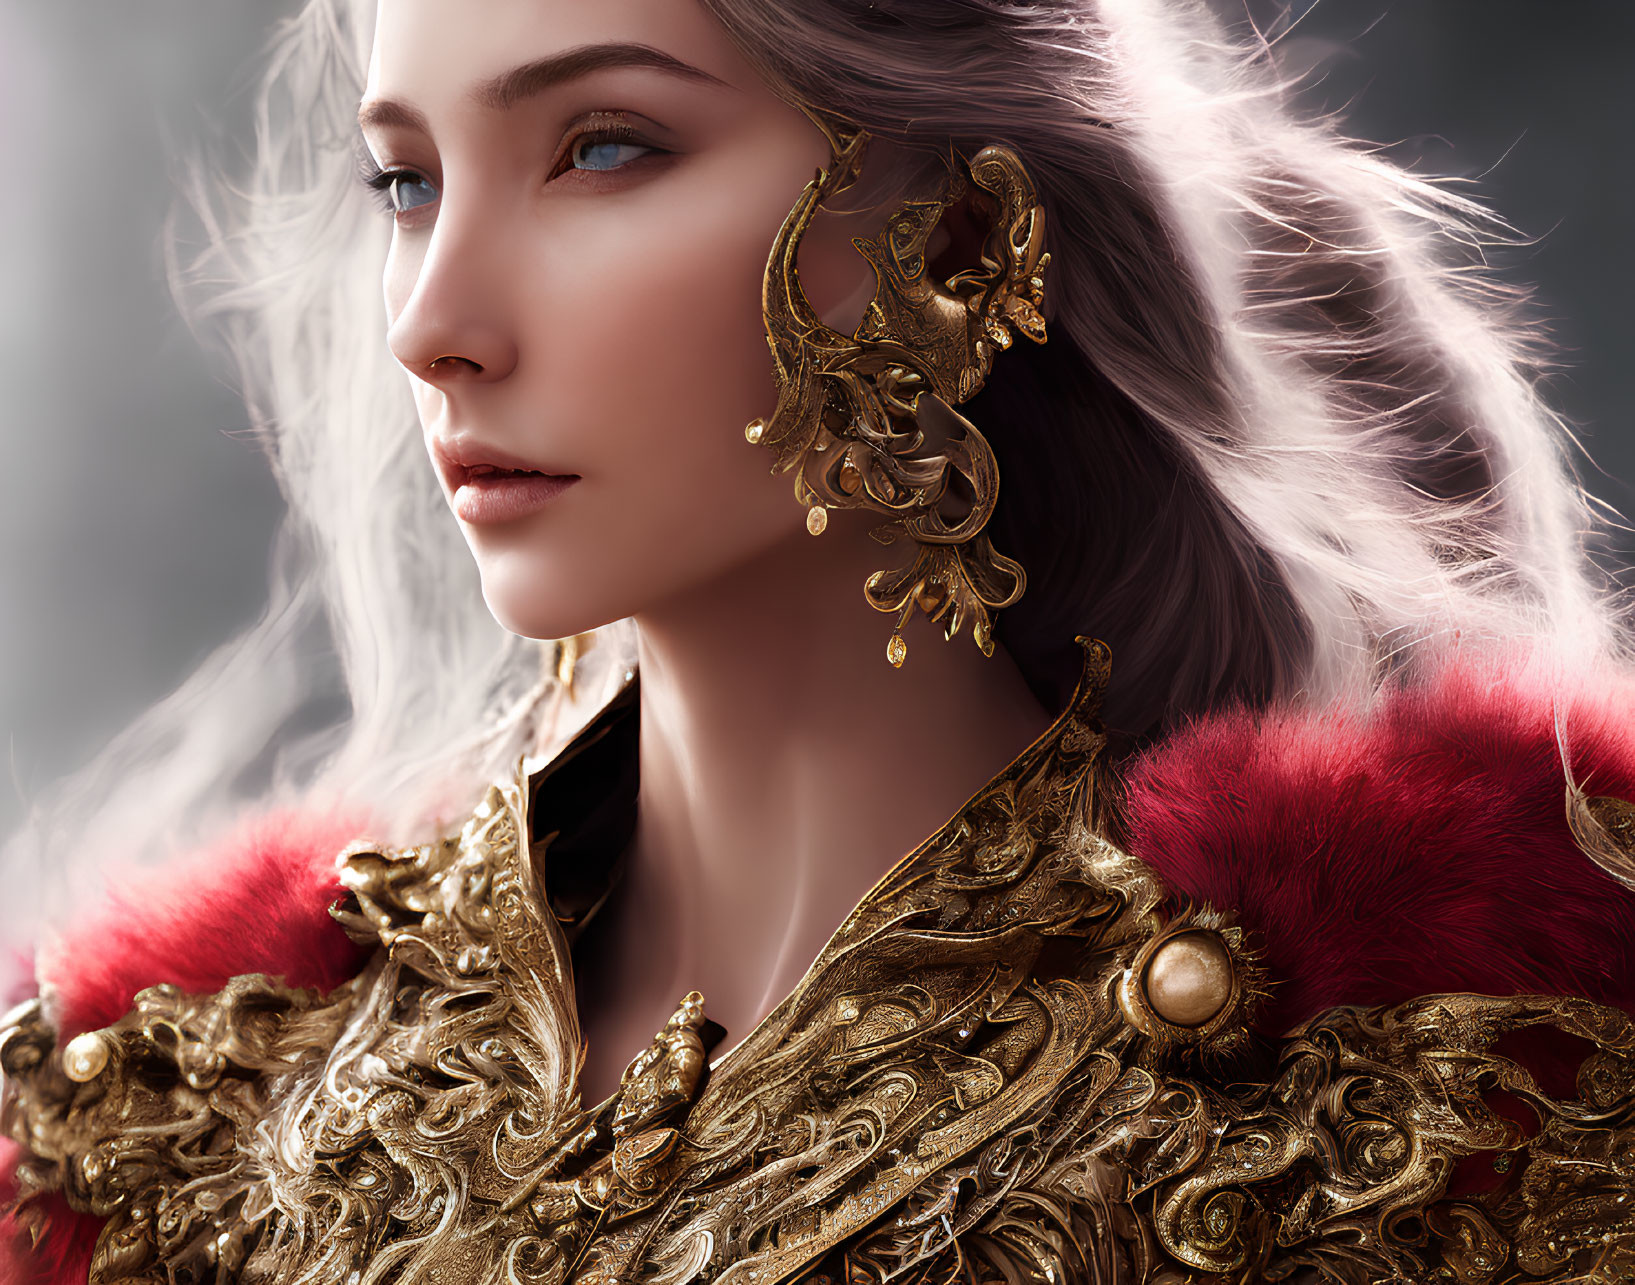 Digital artwork of woman in gold armor with ornate ear jewelry